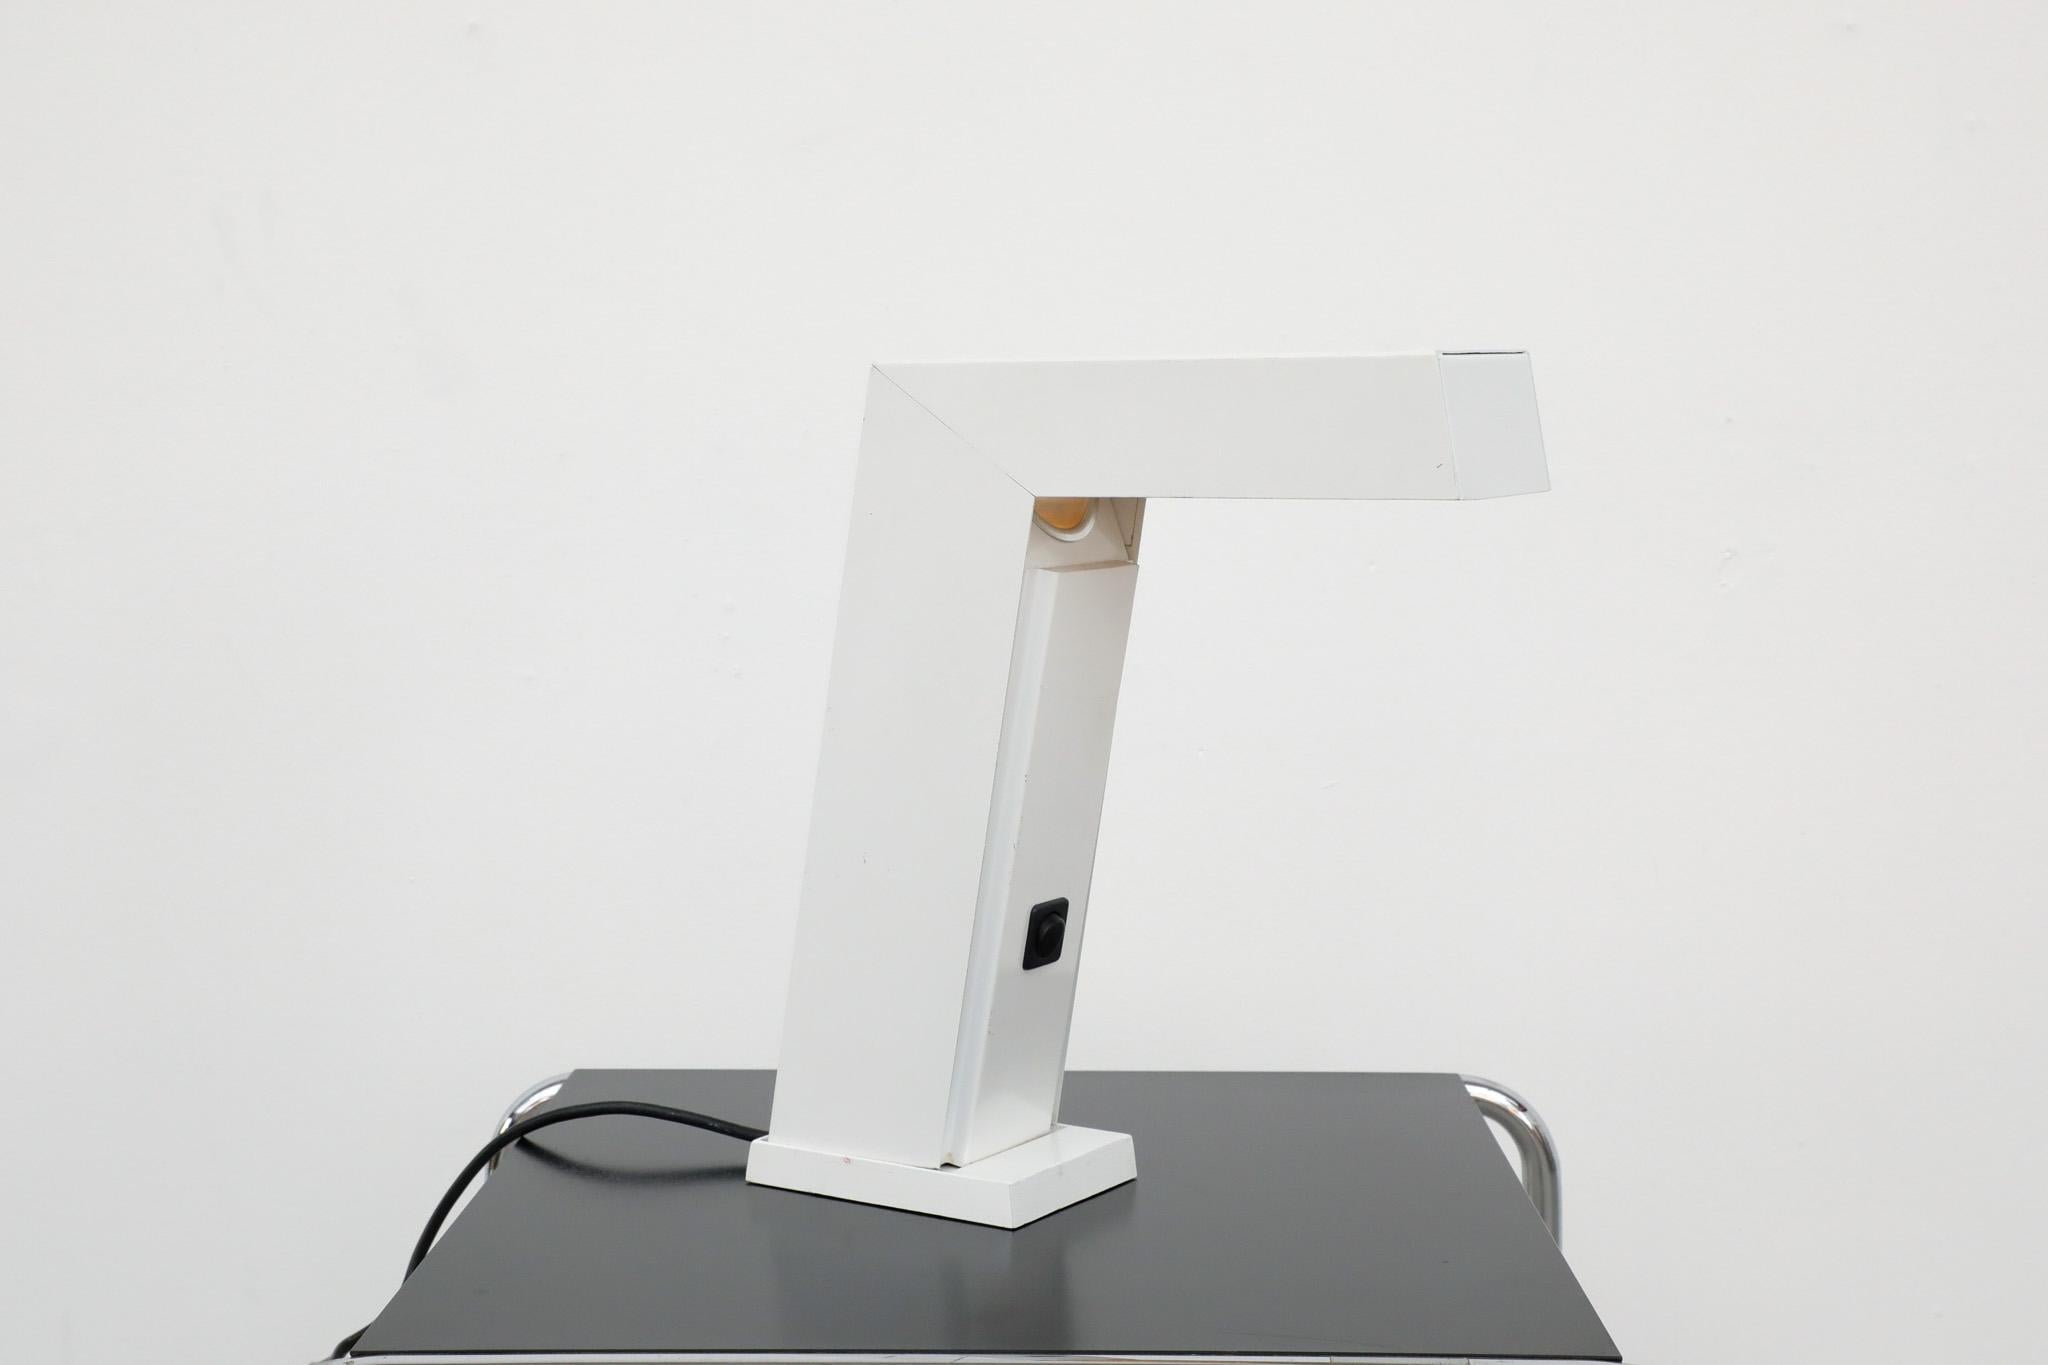 Vintage 'Work-Sun' halogen desk lamp by Euro licht, 1983. An IF Design Award winner with white enameled metal frame and contrasting black power button. Geometric lines and minimalist design. In original condition with light age appropriate wear